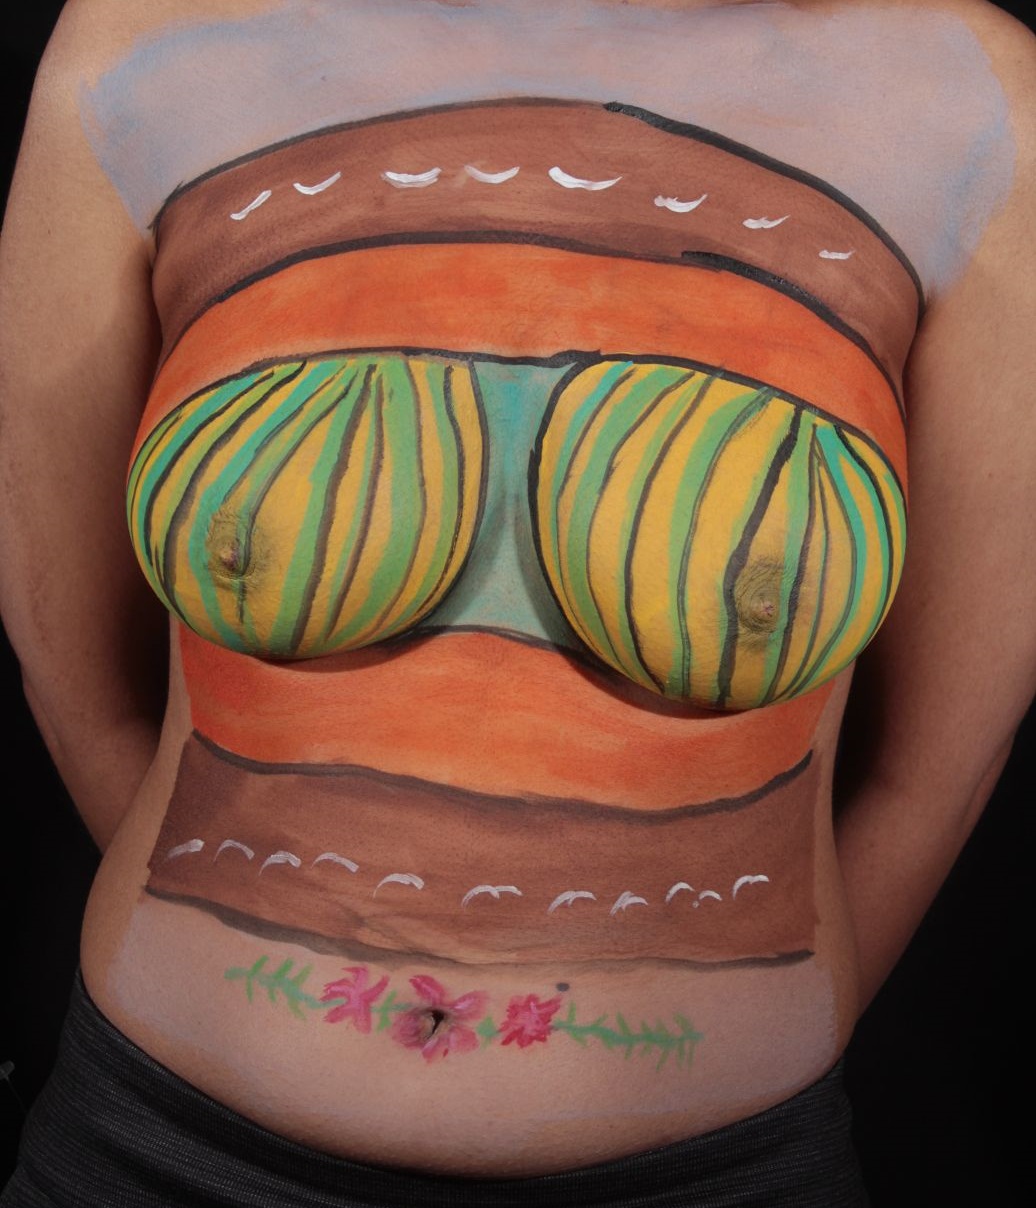 woman's breasts painted in green and yellow lines with brown and orange bands above and below